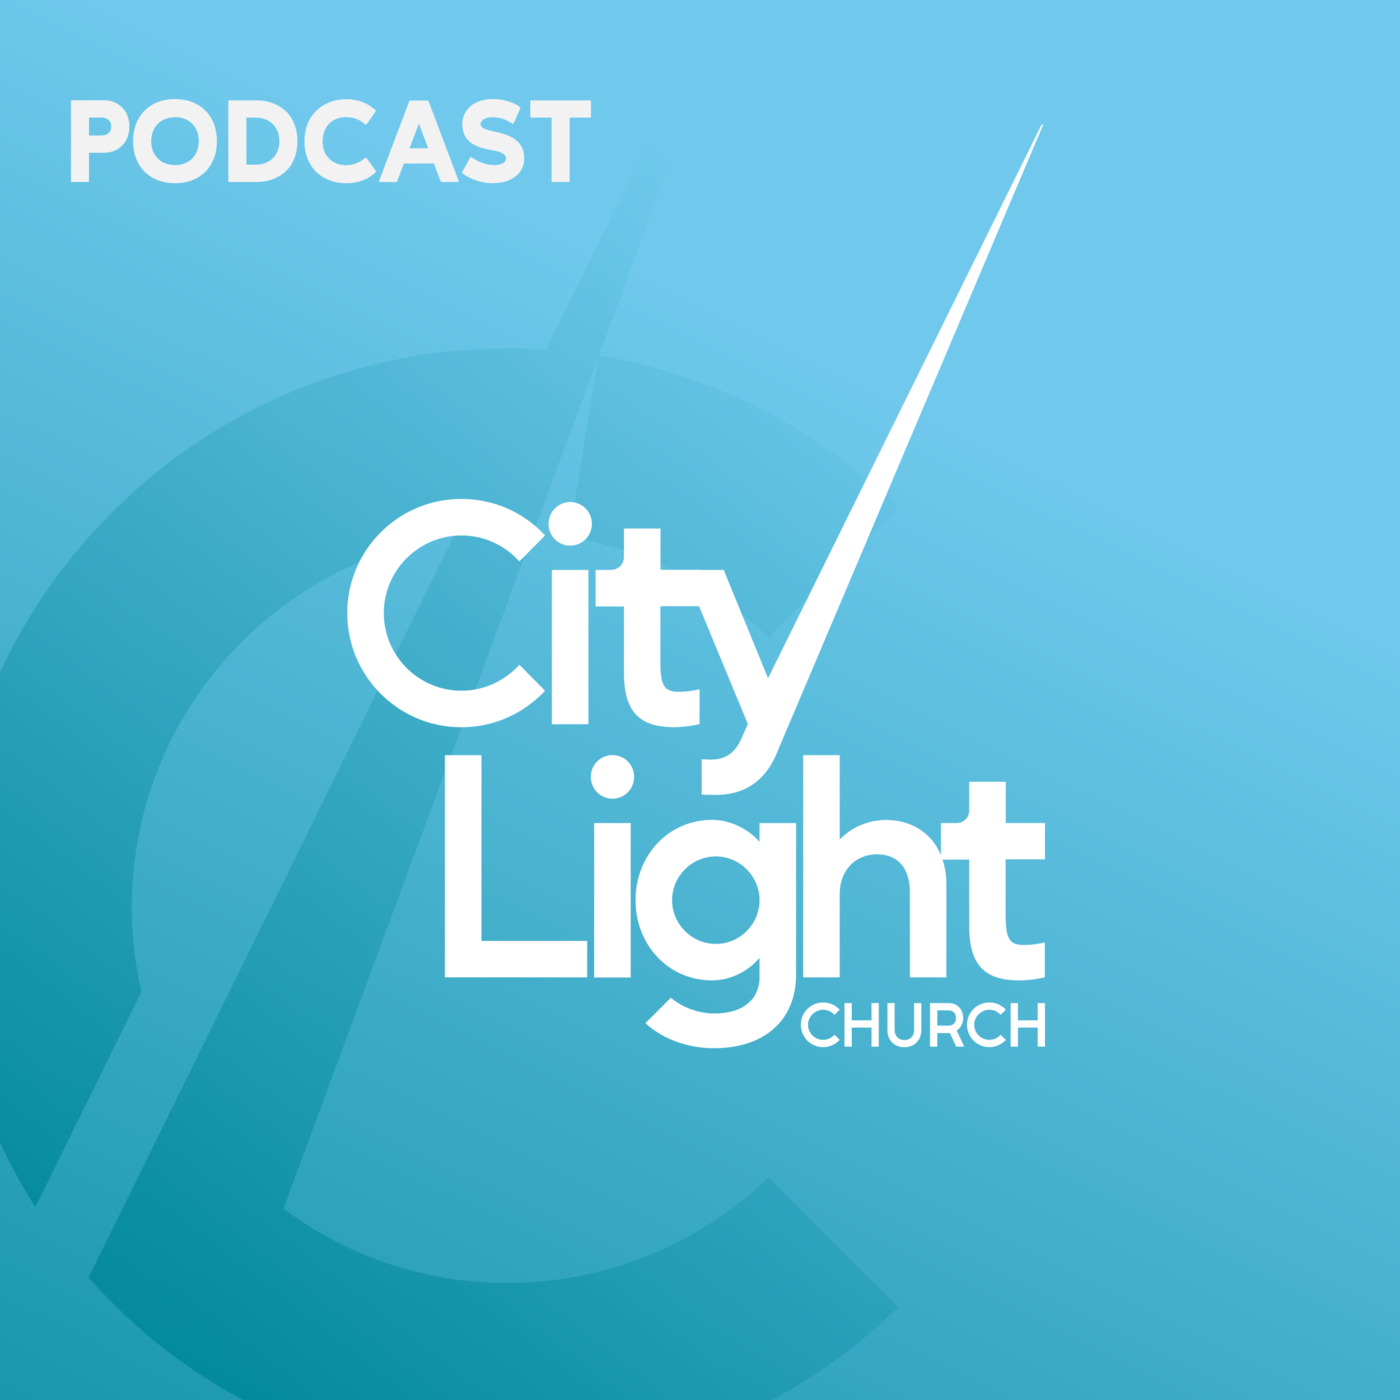  Finding Faith and Community on a Mission Trip to Guatemala: CityLight Church Podcast Reflections